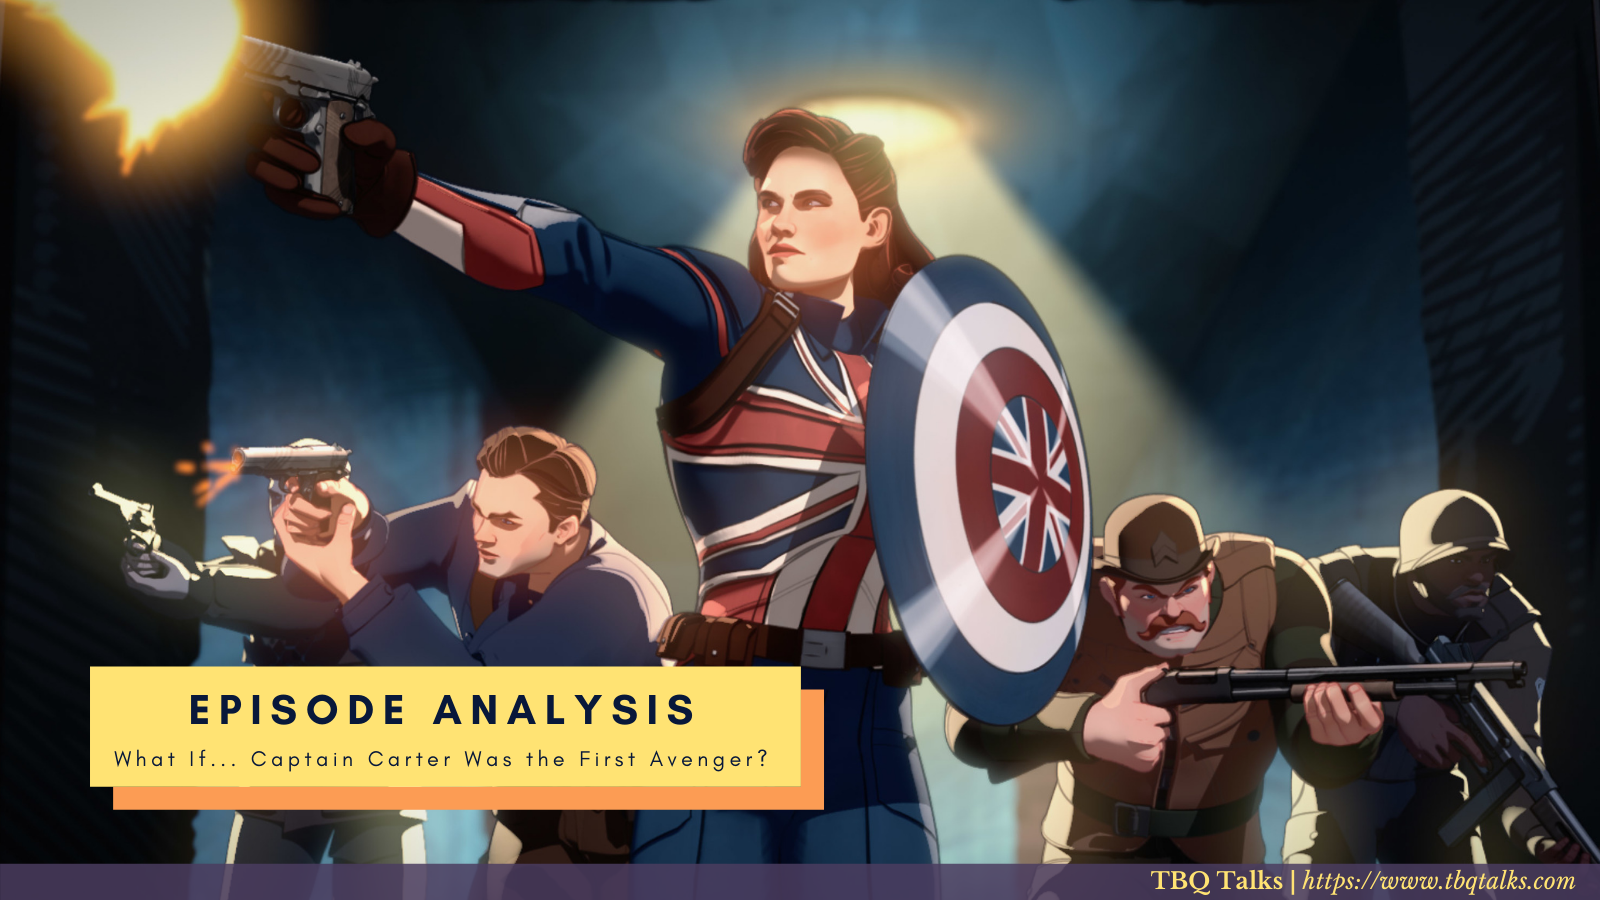 Episode Analysis What If... Captain Carter Was the First Avenger?